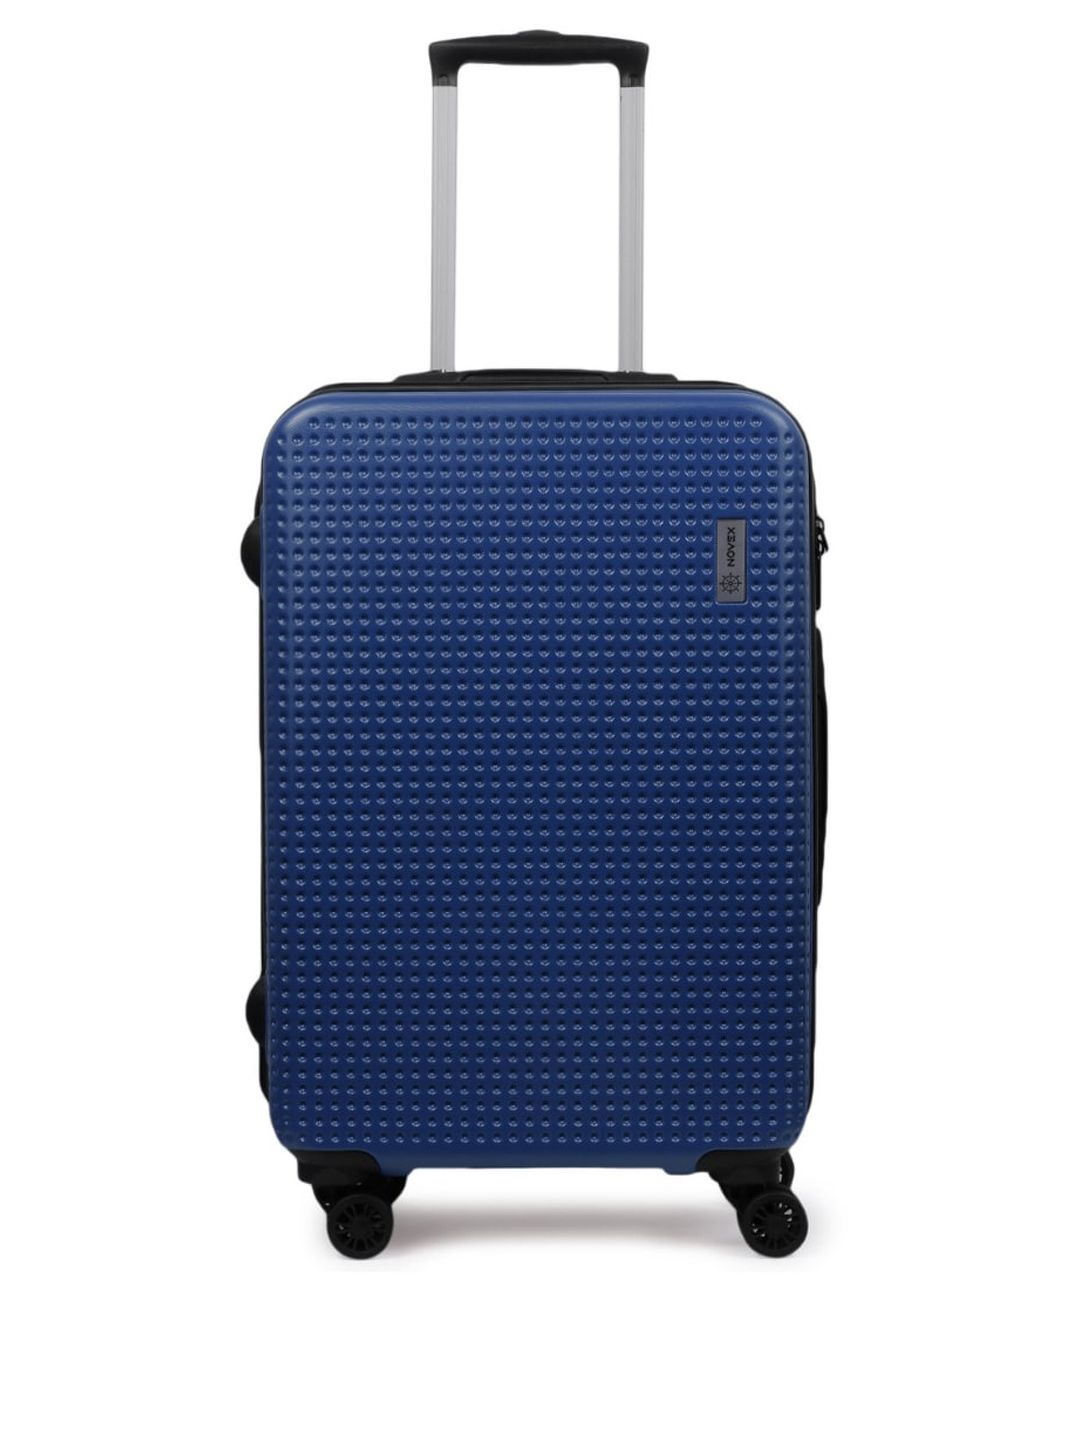 NOVEX Blue Textured Hard-Sided Medium Suitcase Trolley Bag Price in India